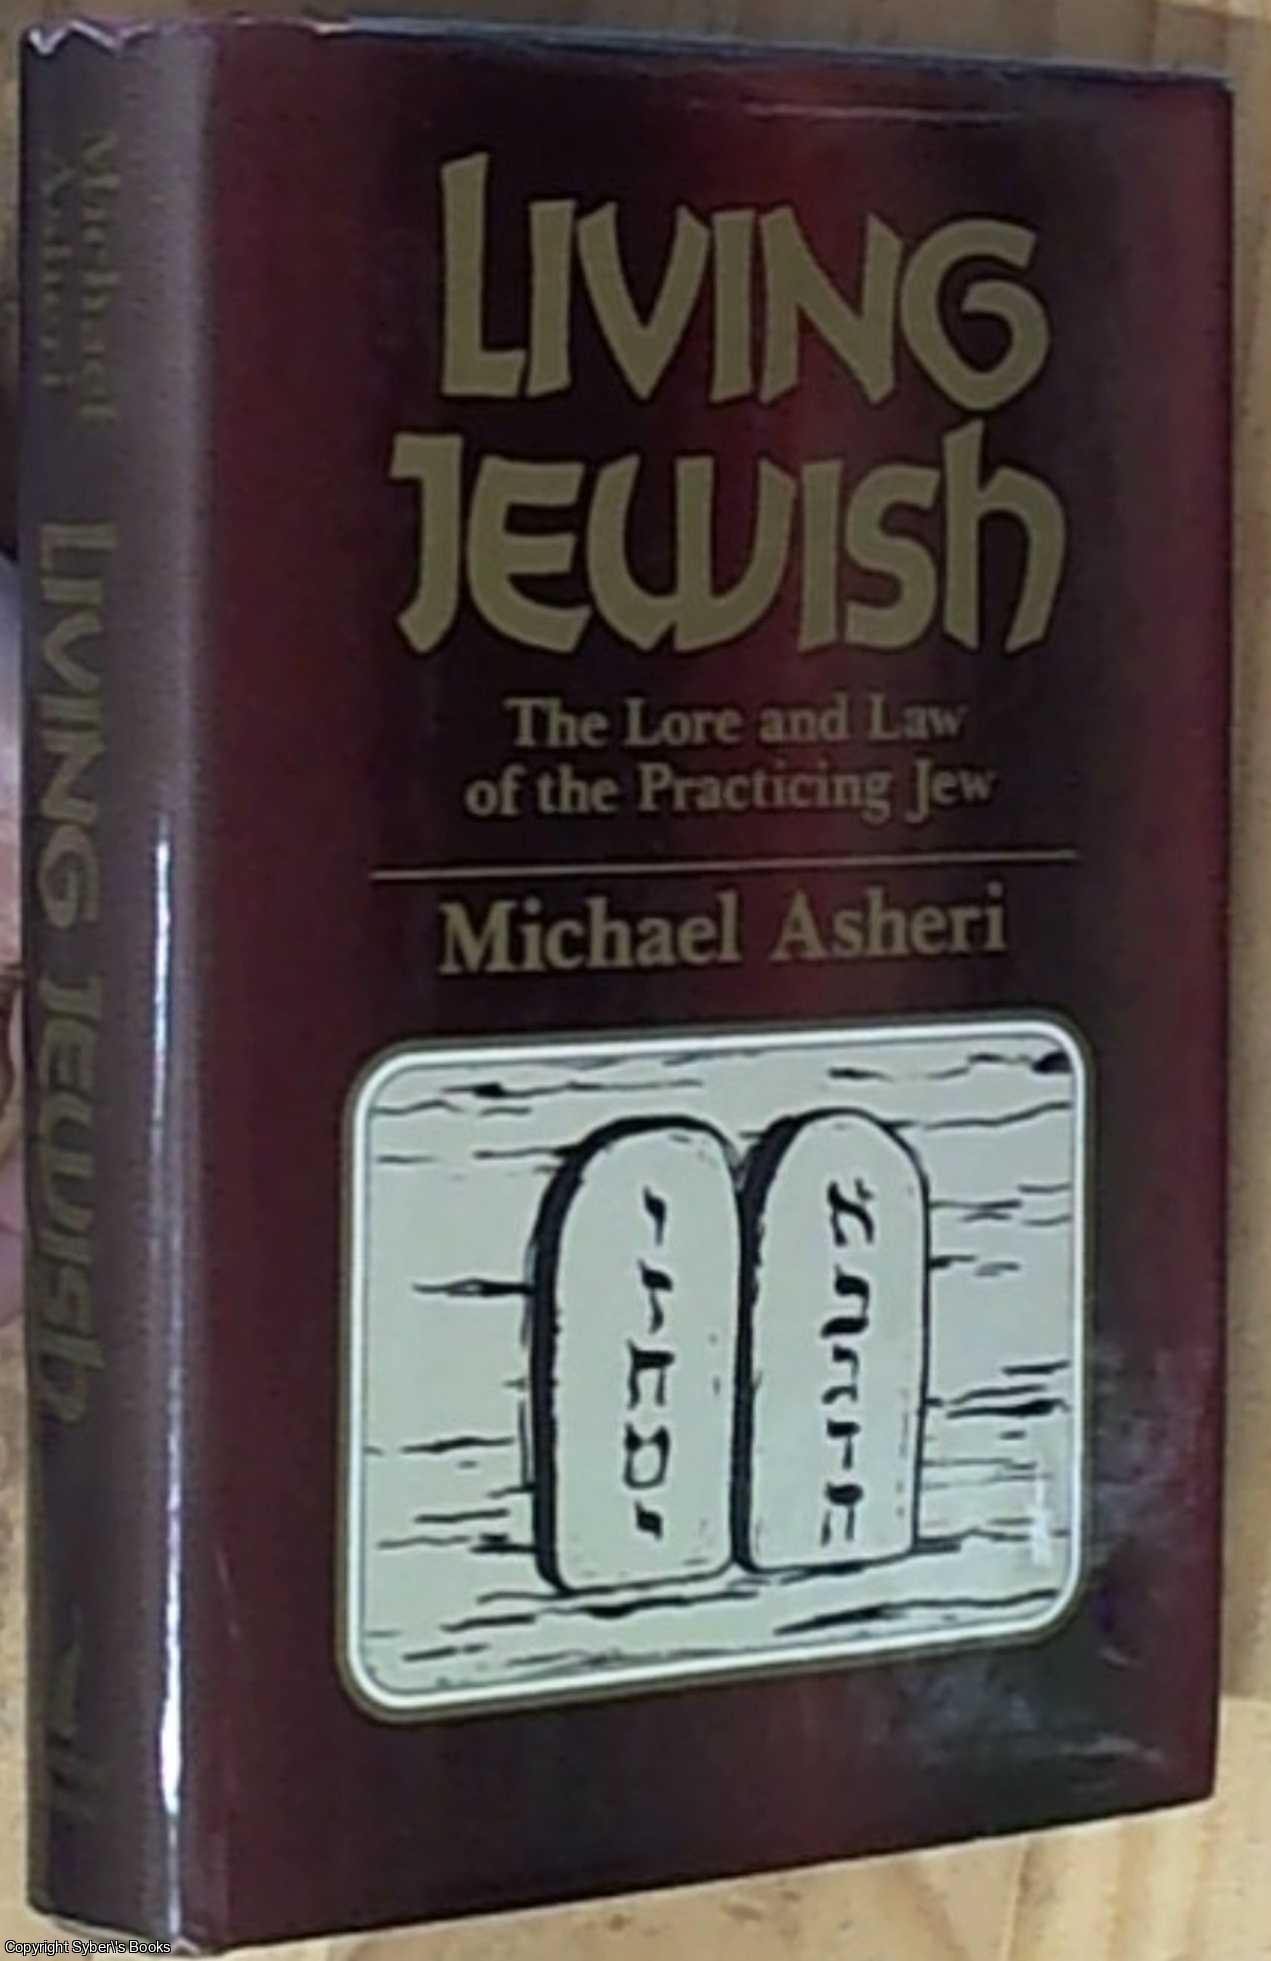 Asheri, Michael - Living Jewish: The Lore and Law of Being a Practicing Jew